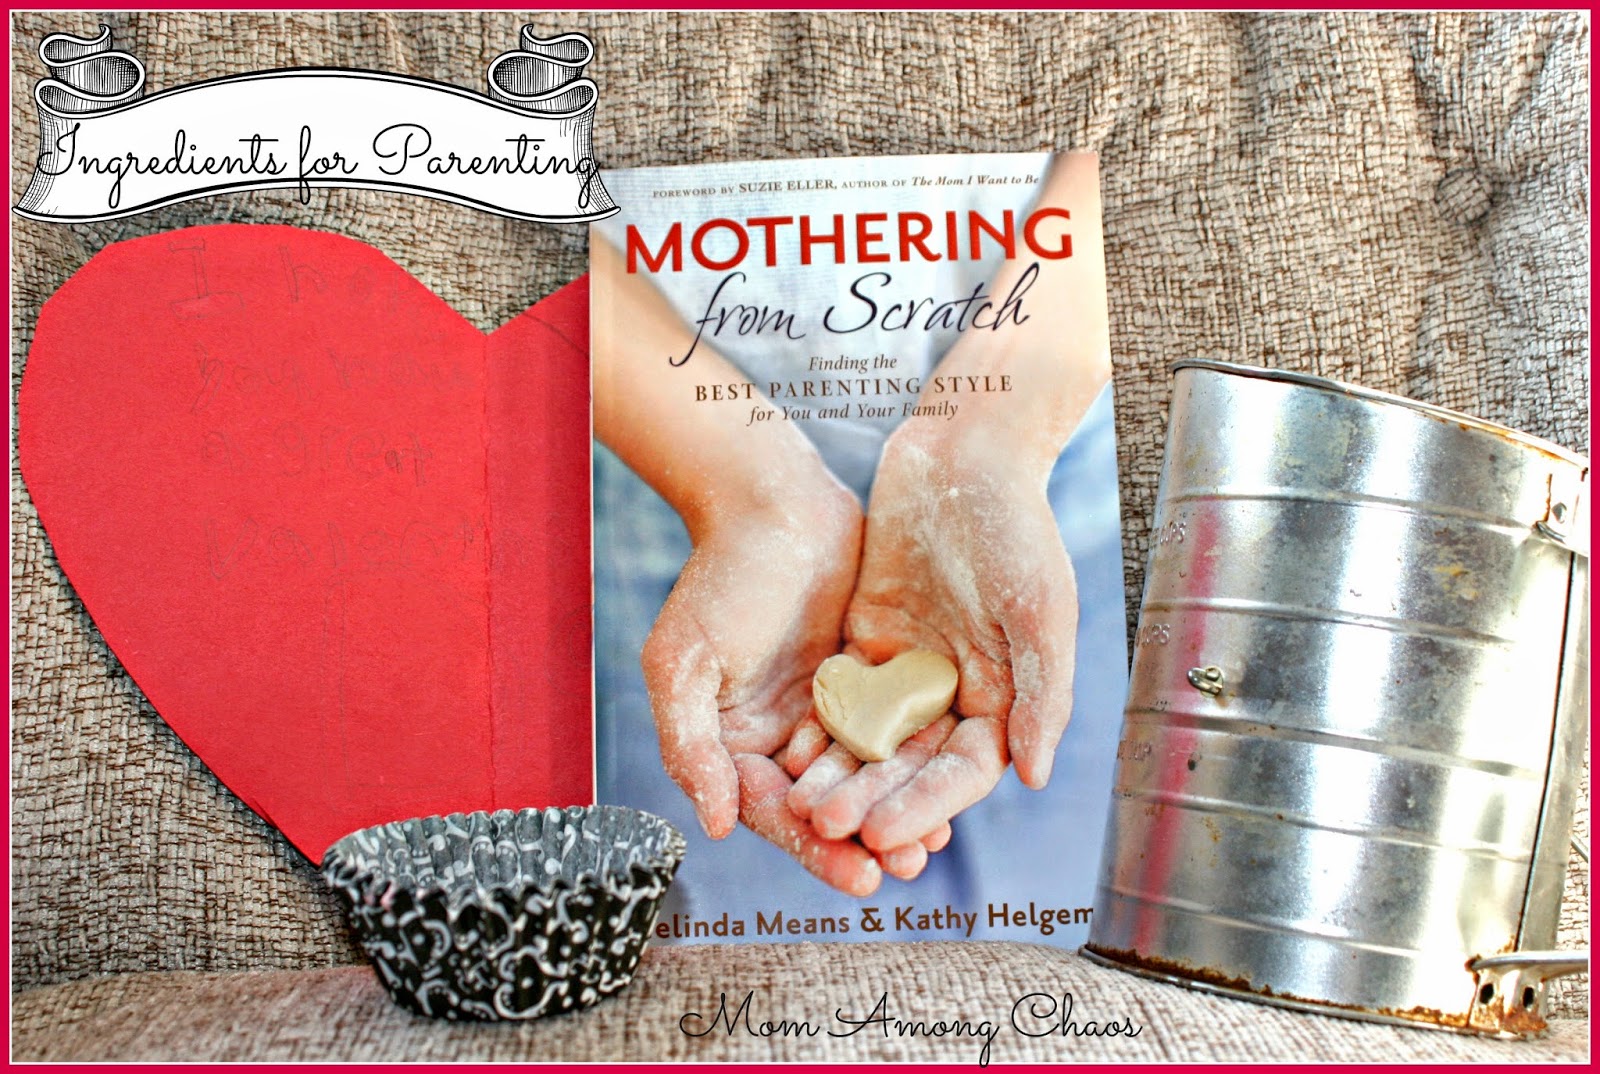 Mothering From Scratch, God, parenting, self help, advice, family christian, family, book review, 